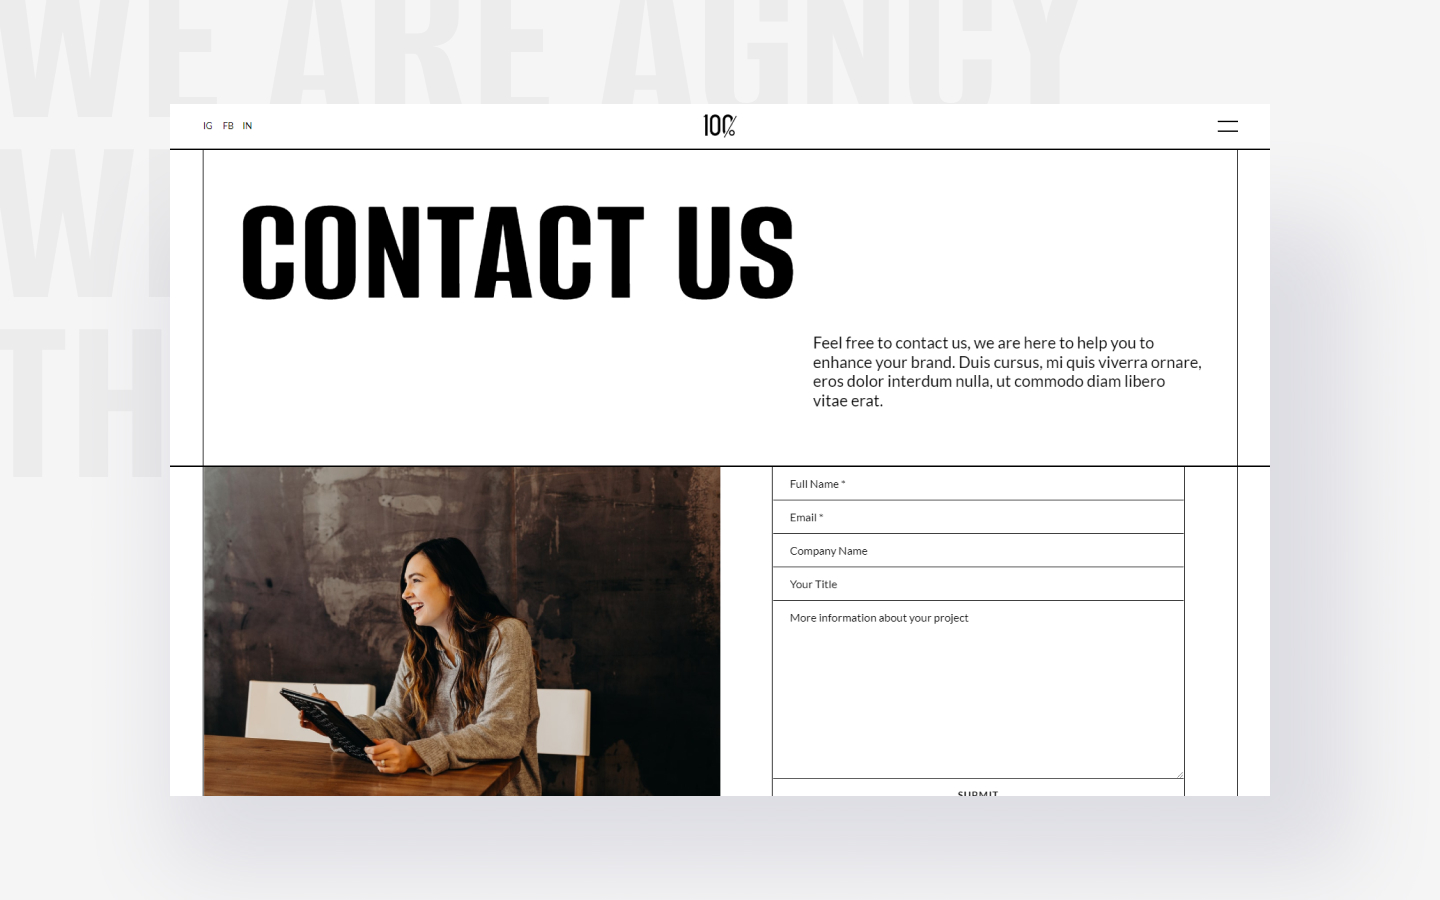 100Agenci - Webflow Template for Creative Agency